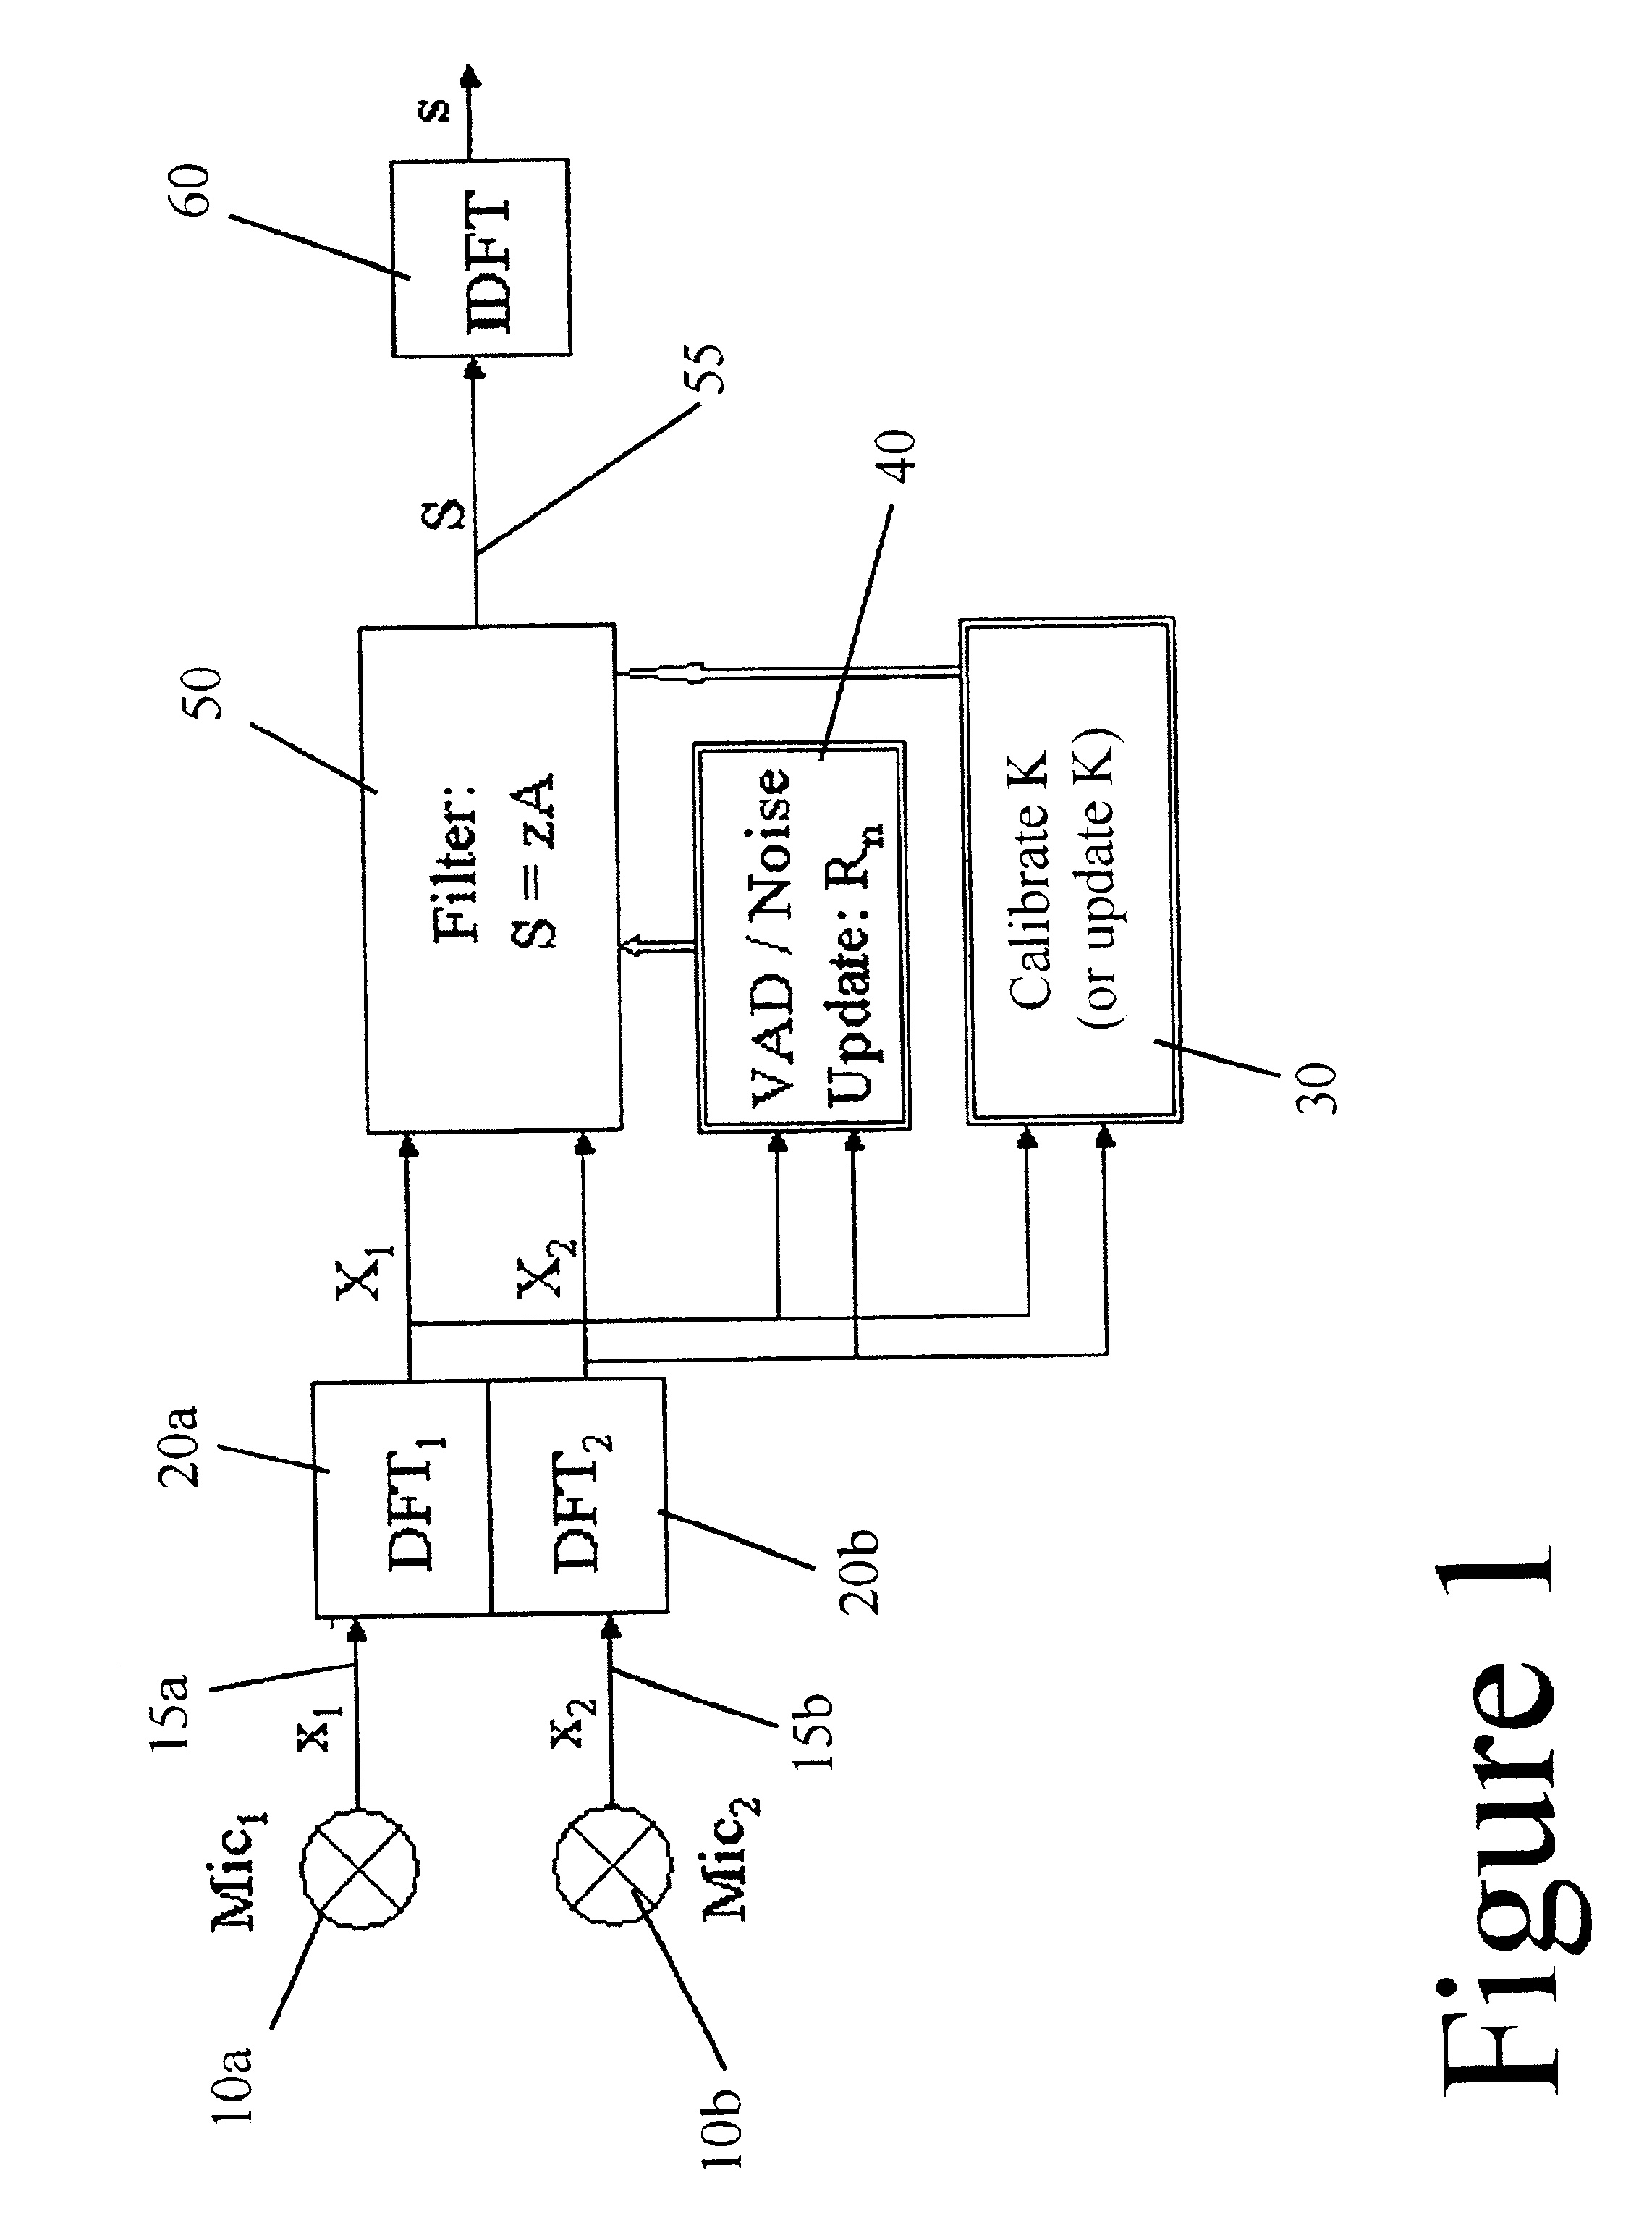 Method and apparatus for noise filtering